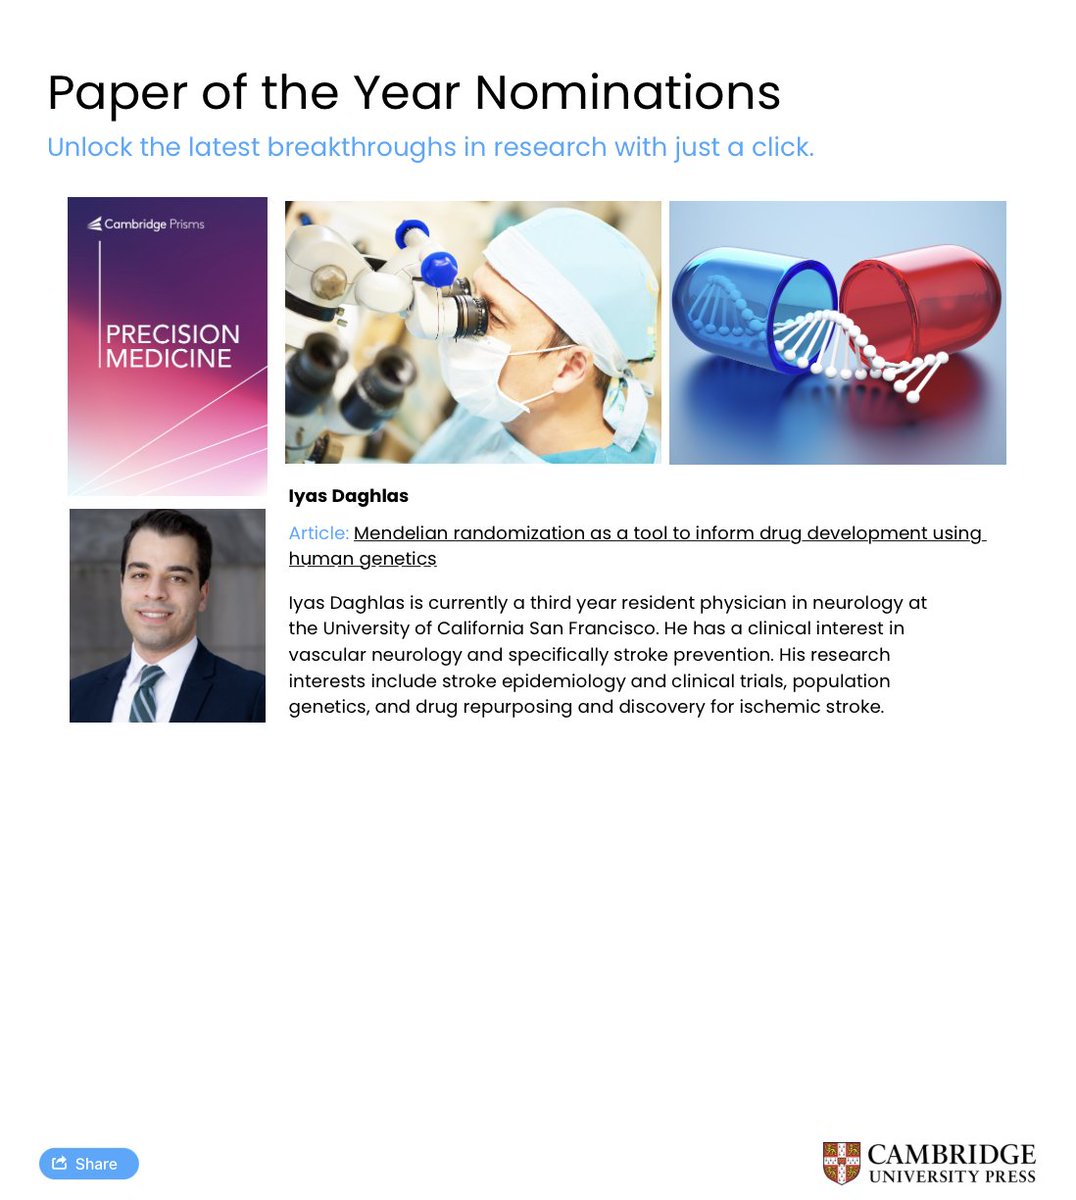 Nominated for paper of the year in #CPPecisionmedicine: Mendelian randomization as a tool to inform drug development using human genetics by @iyas_daghlas and @dpsg108. Read the full article now: bit.ly/4dxt4J0 #genomics #pharmacogenomics #PrecisionMedicine